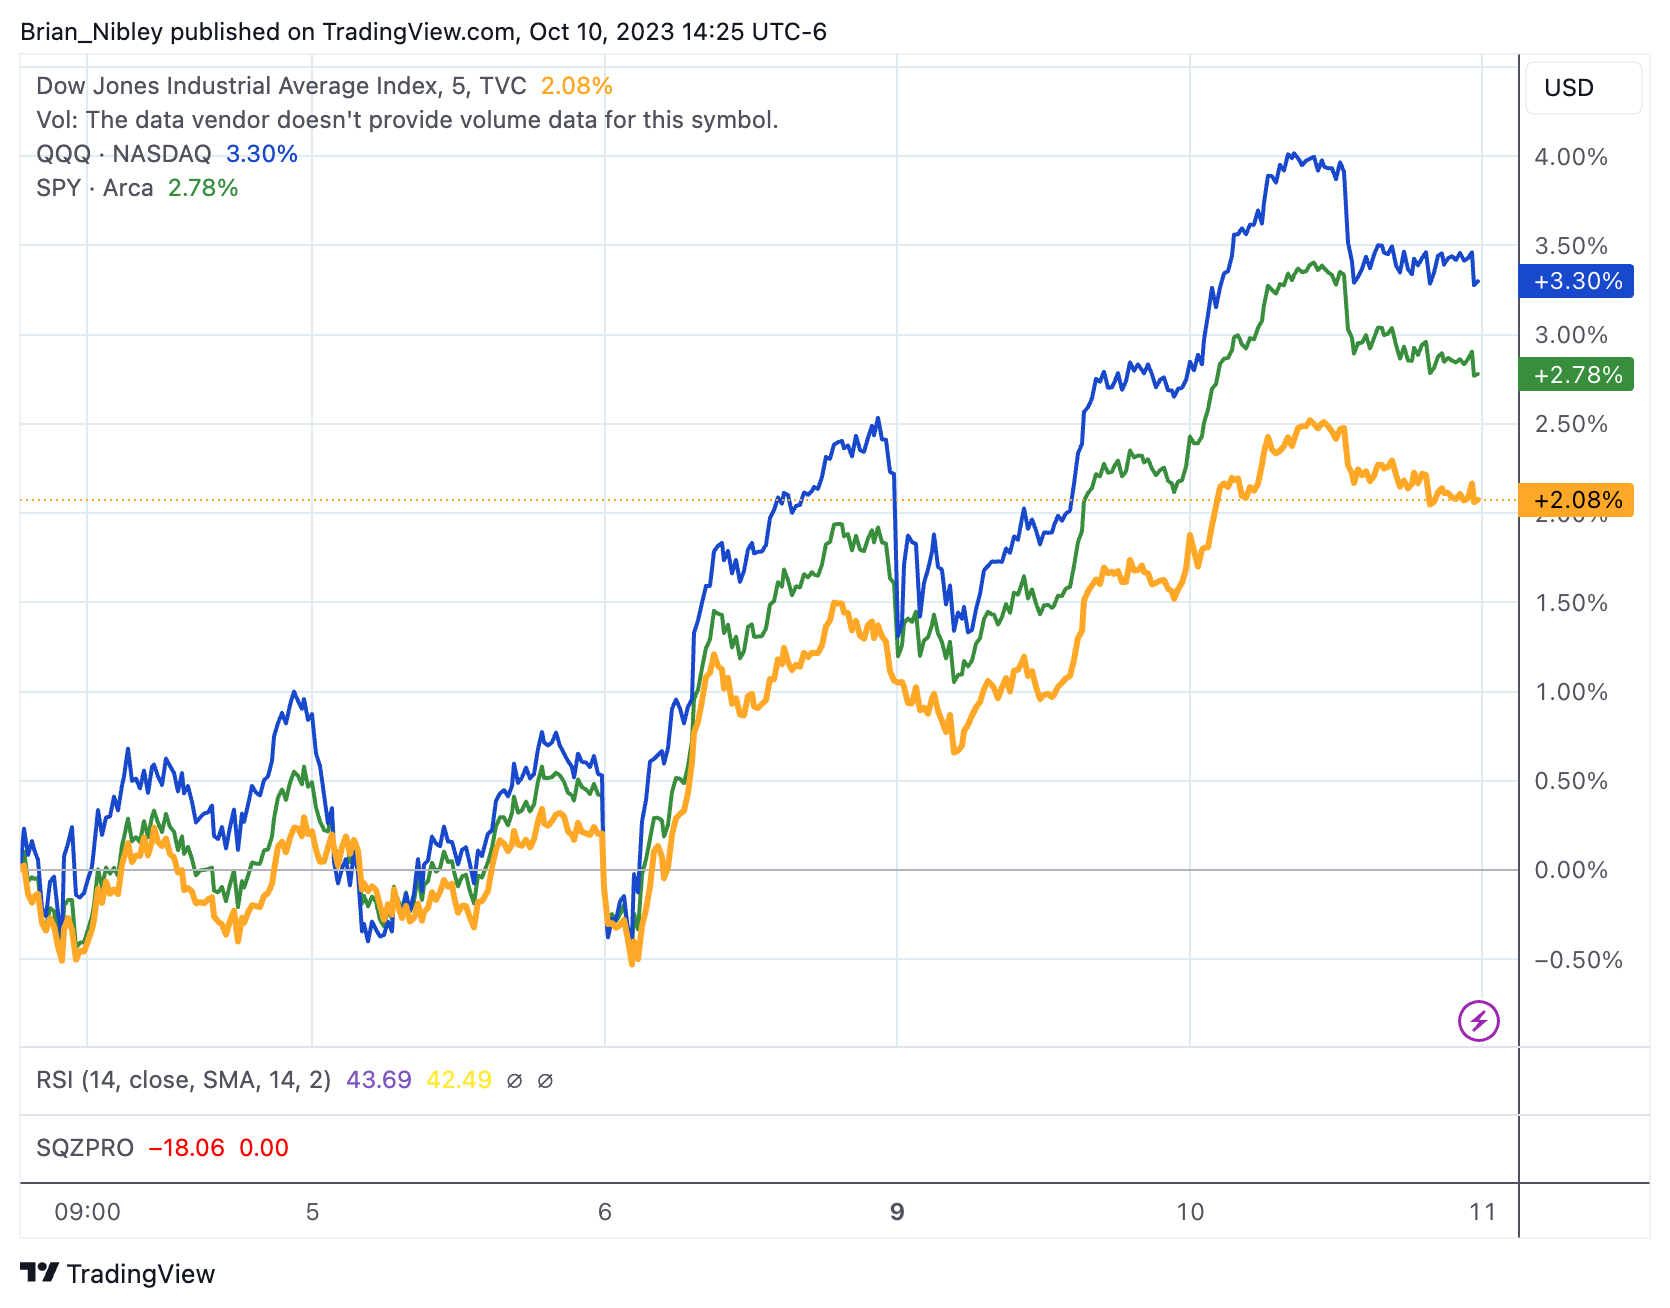 Dow Jones Industrial Average, QQQ, and SPY 5-day chart. Source: TradingView